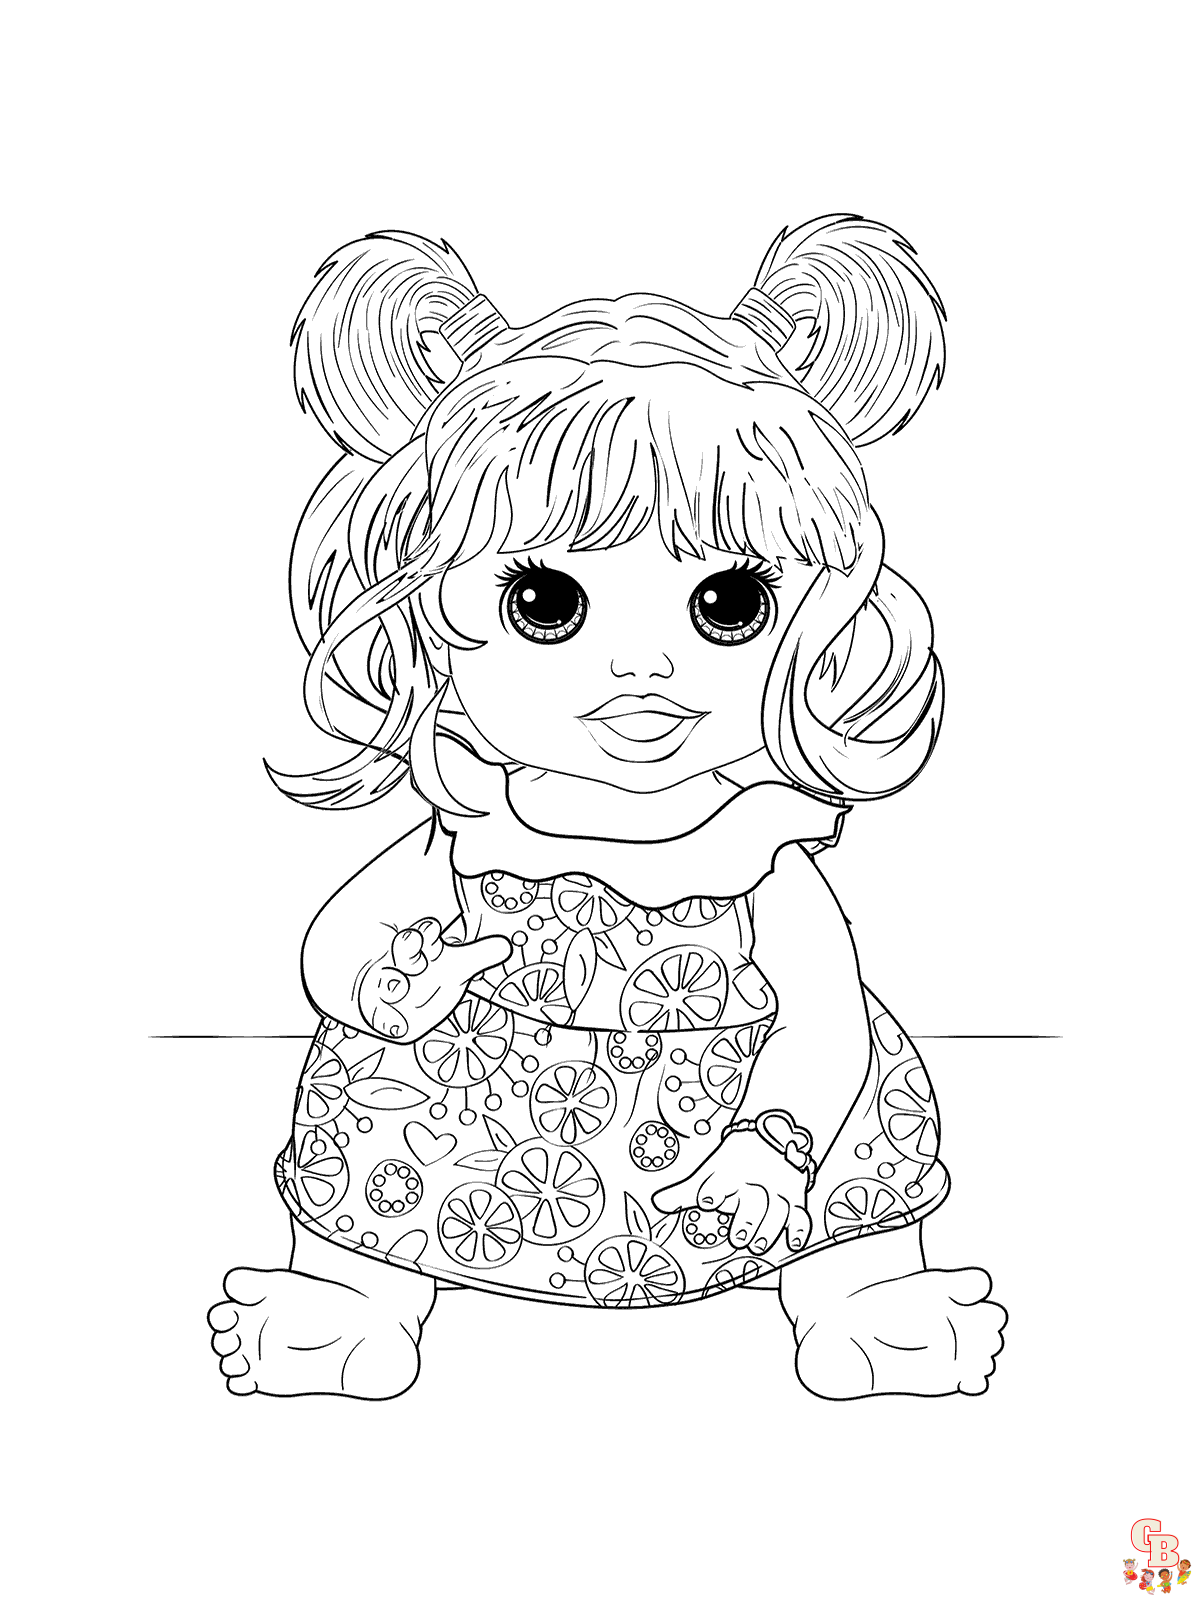 Cute Baby Alive Doll 塗り絵 2